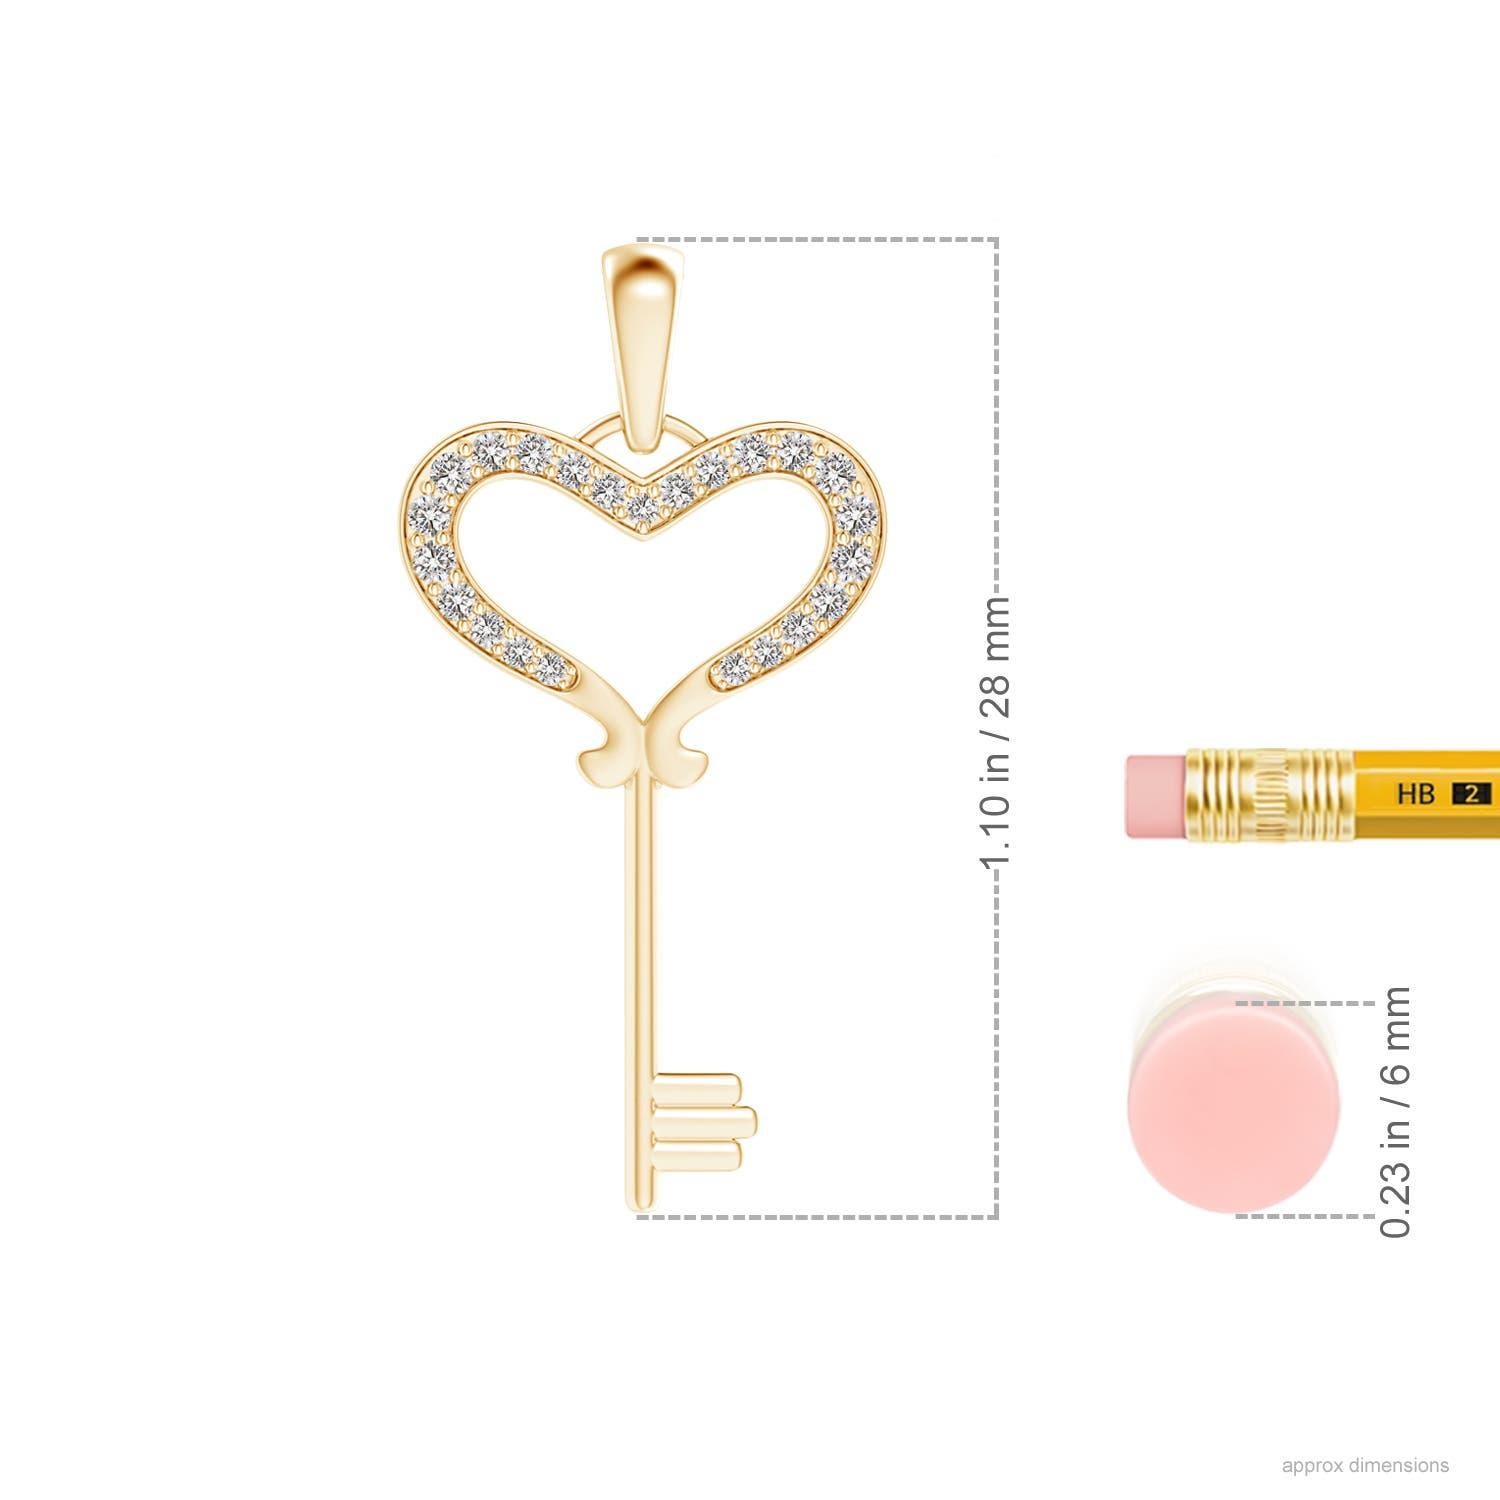 This adorable heart key pendant is designed with a touch of romance. Diamonds, encrusted on the open heart, dazzle in an intricate pave setting. Beautifully crafted in 14k yellow gold, this diamond key pendant embodies timeless glamour.
Diamond is